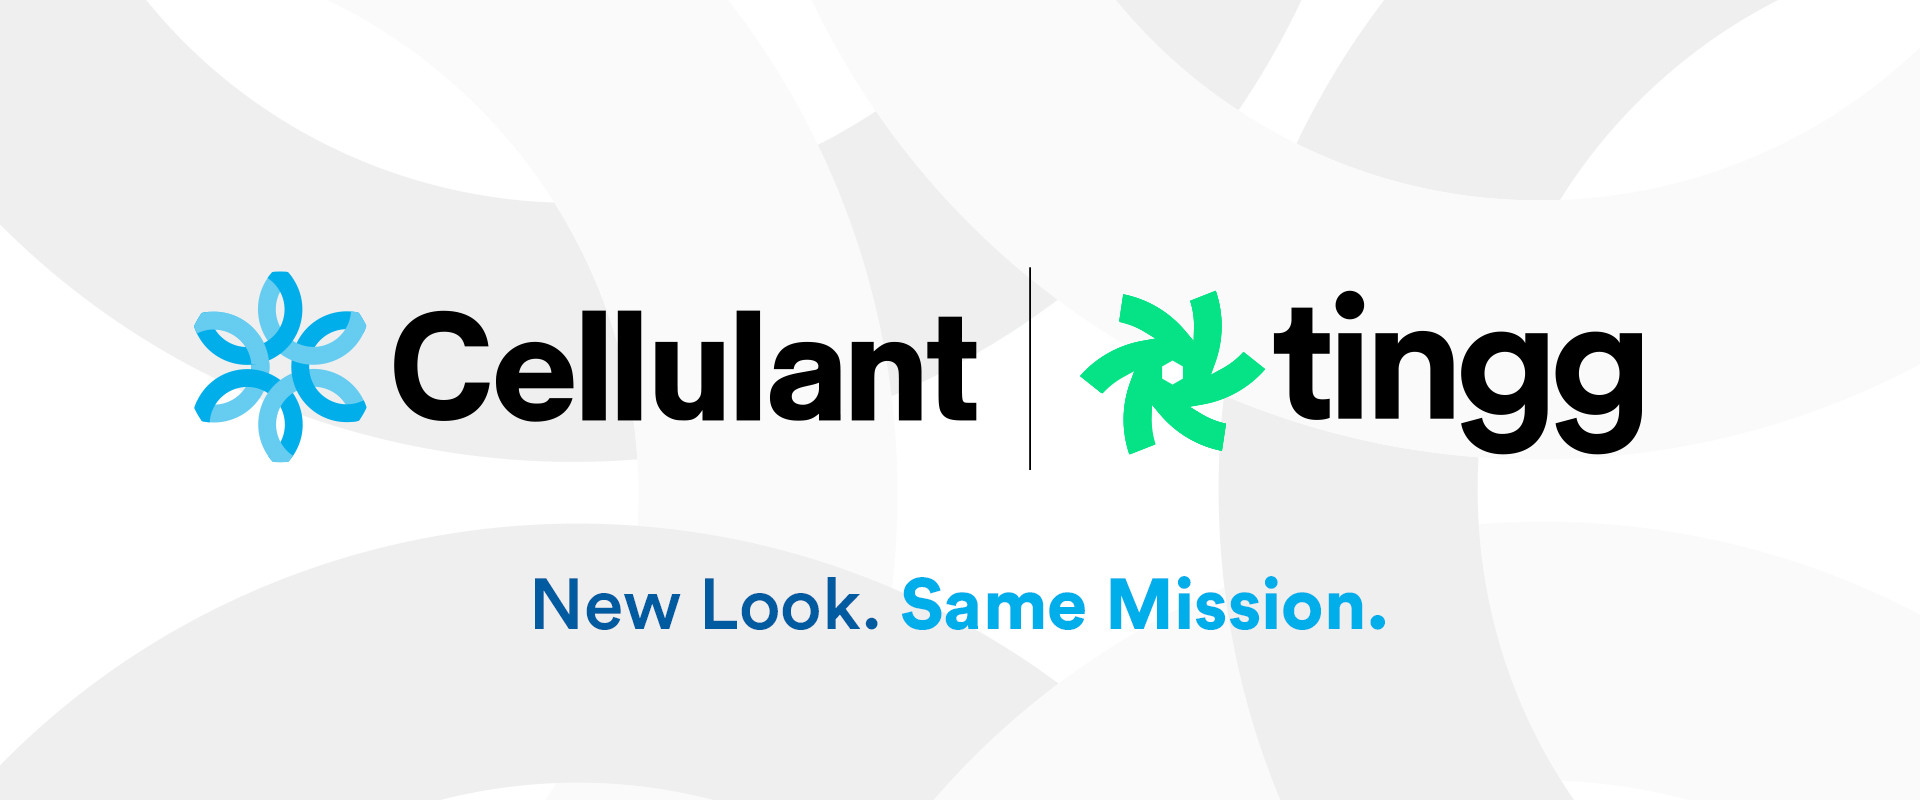 New Look. Same Mission: The Journey of Refreshing Our Brand Identity